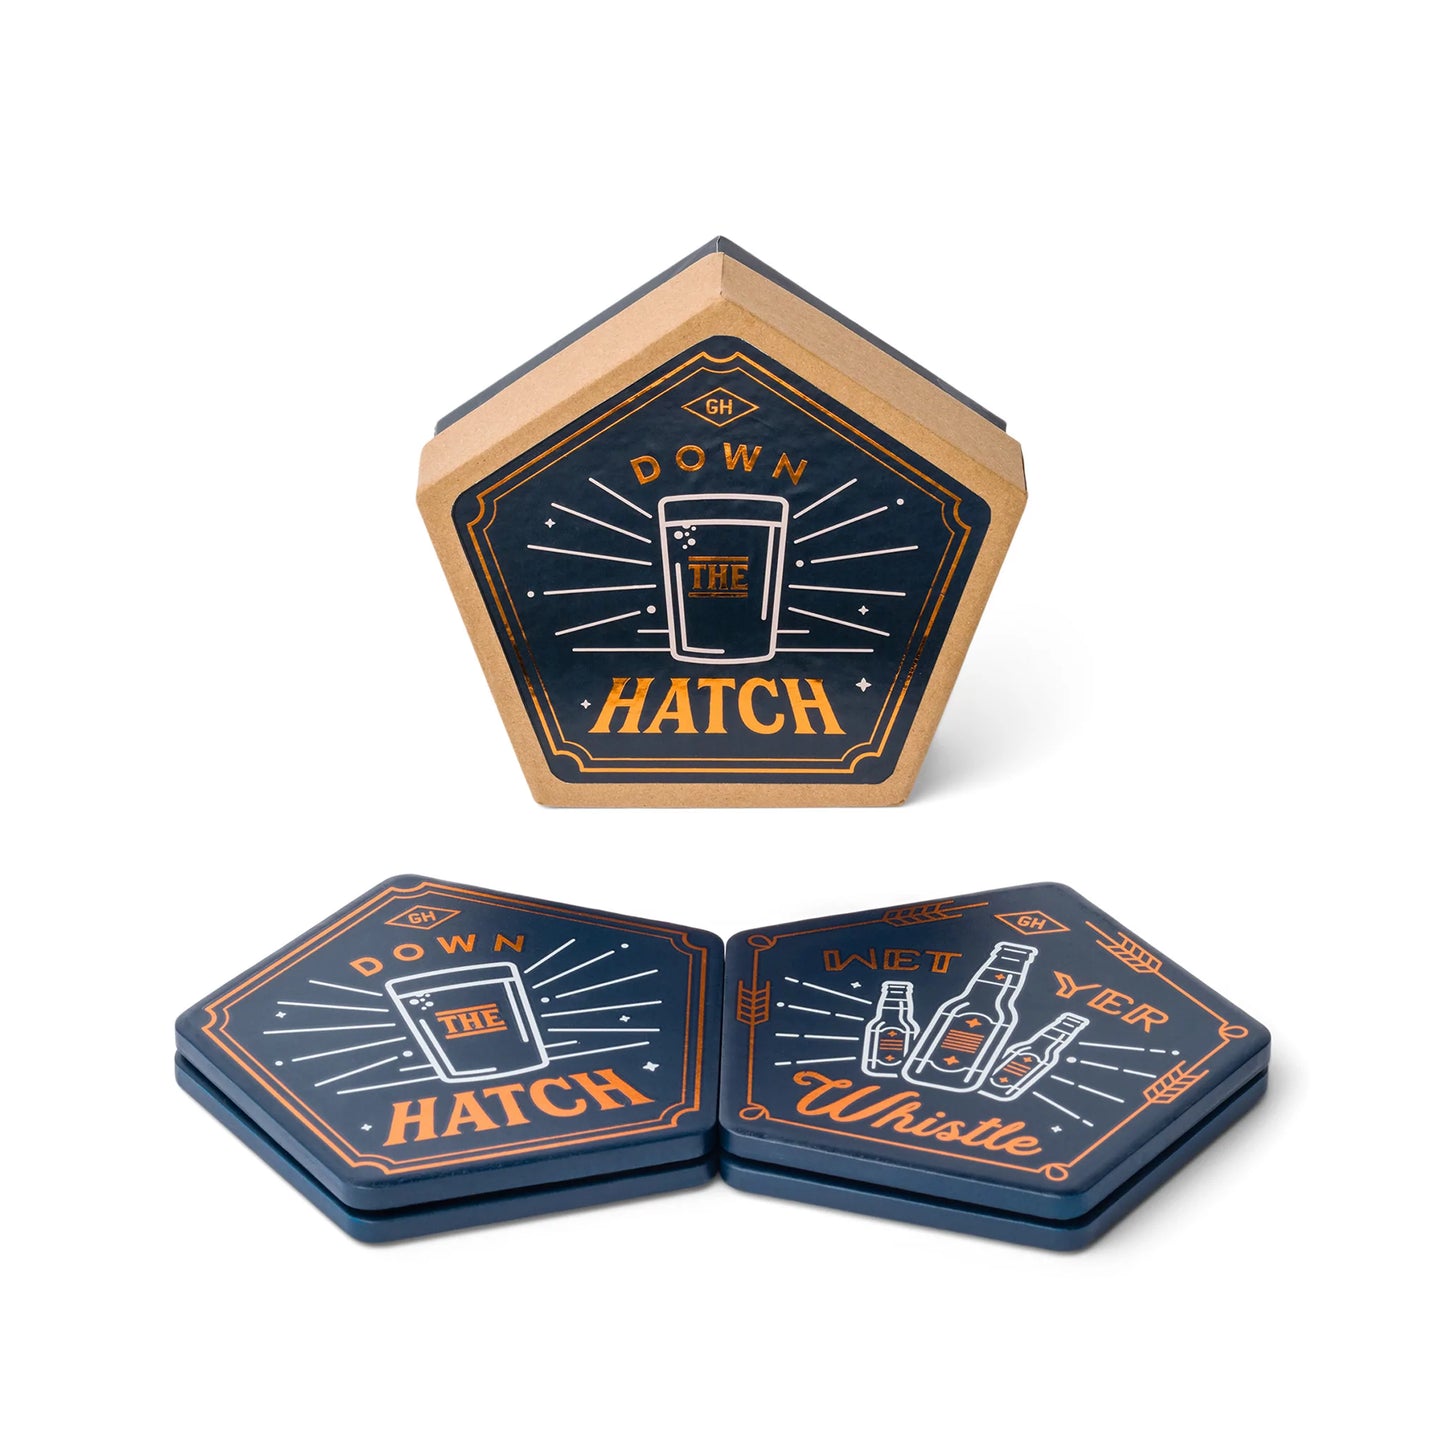 Down the Hatch Coasters